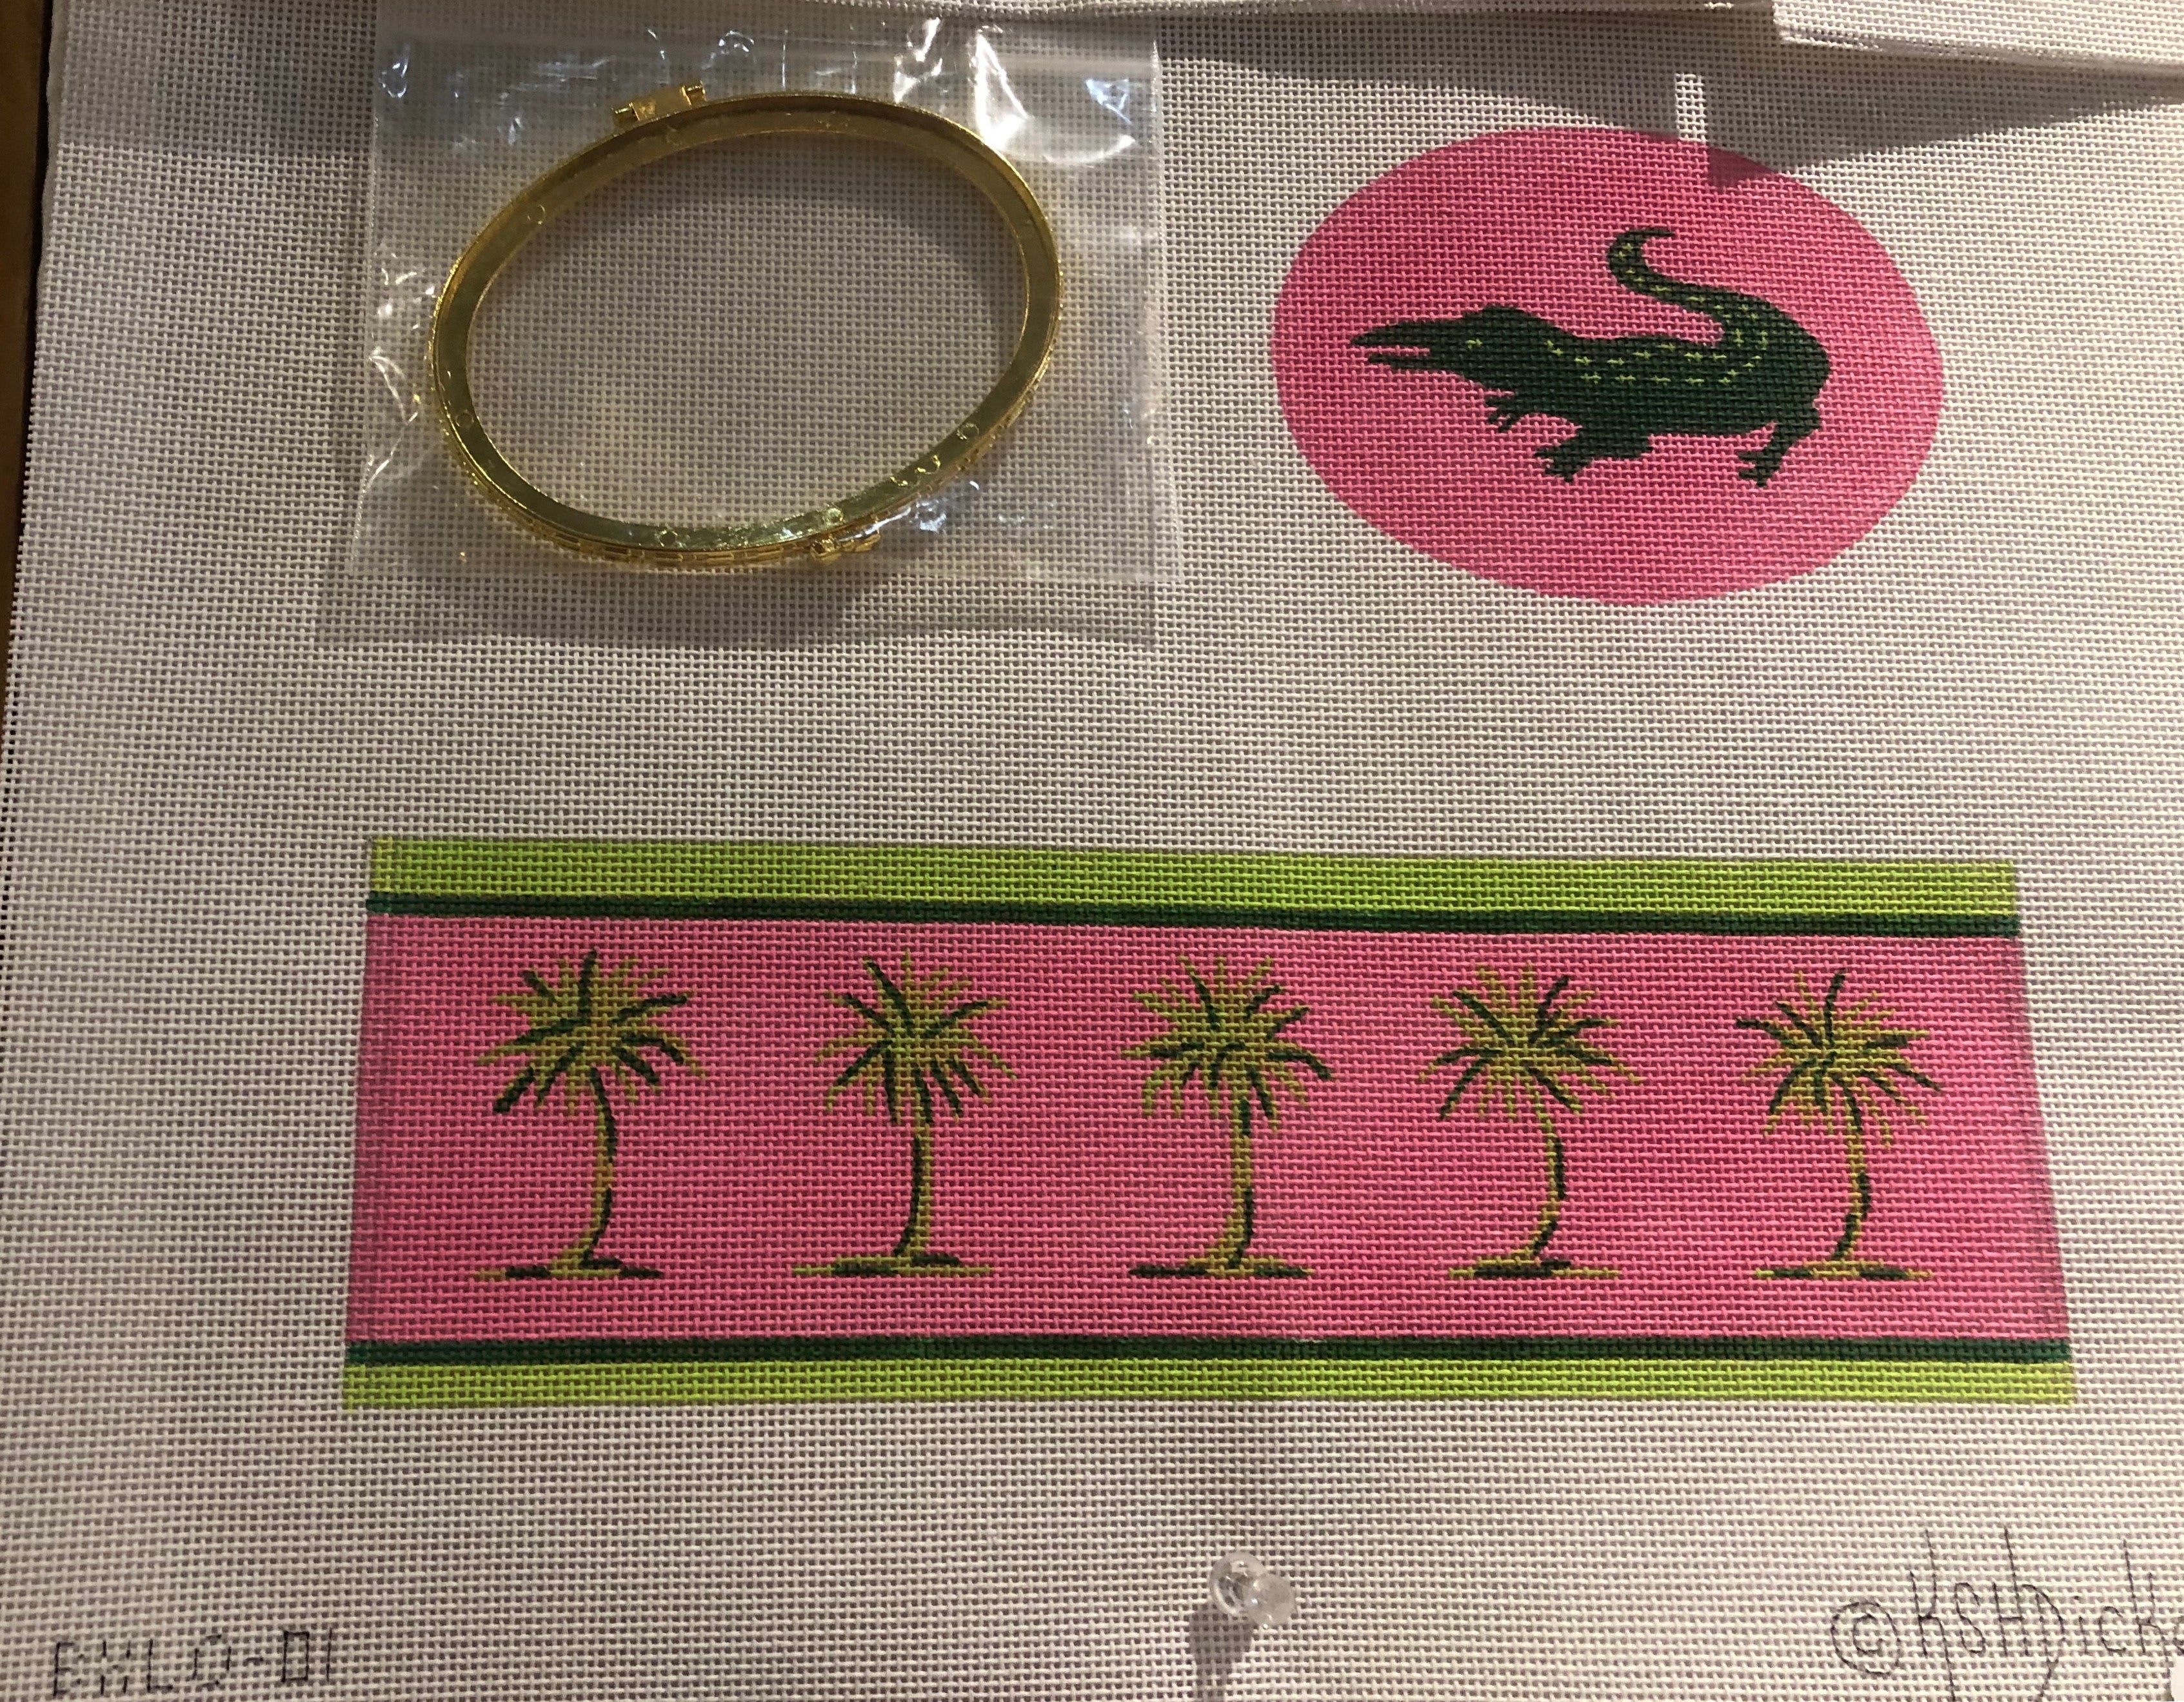 Kate Dickerson BXLO-01 Green Gator and Palms on Hot Pink Hinged Box